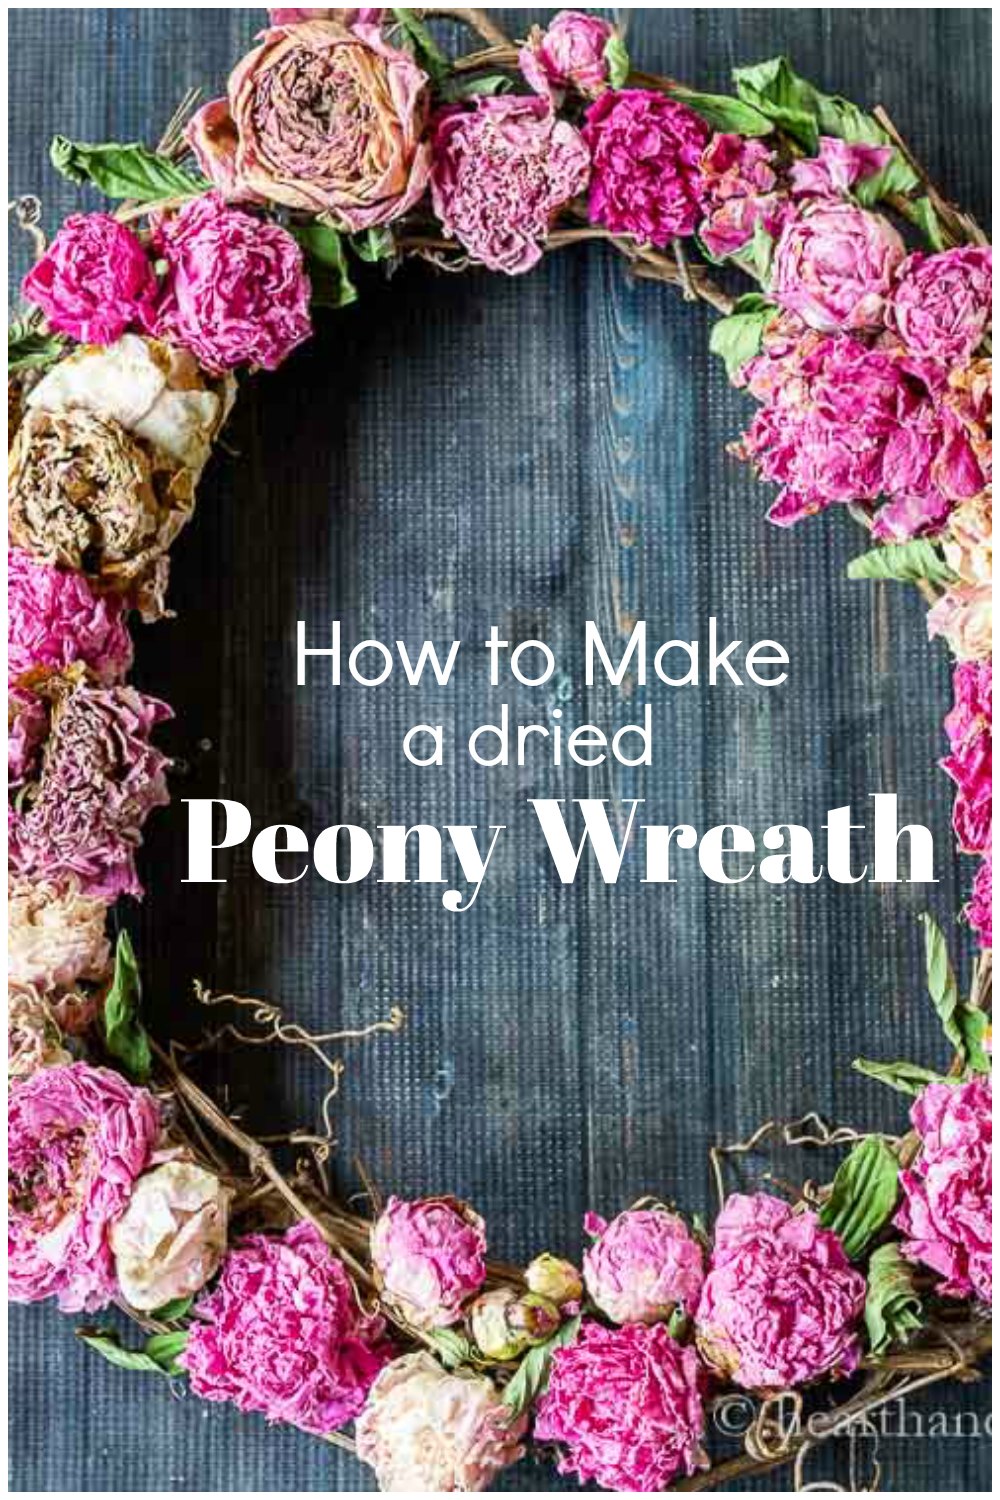 Dried Peony wreath with text overlay